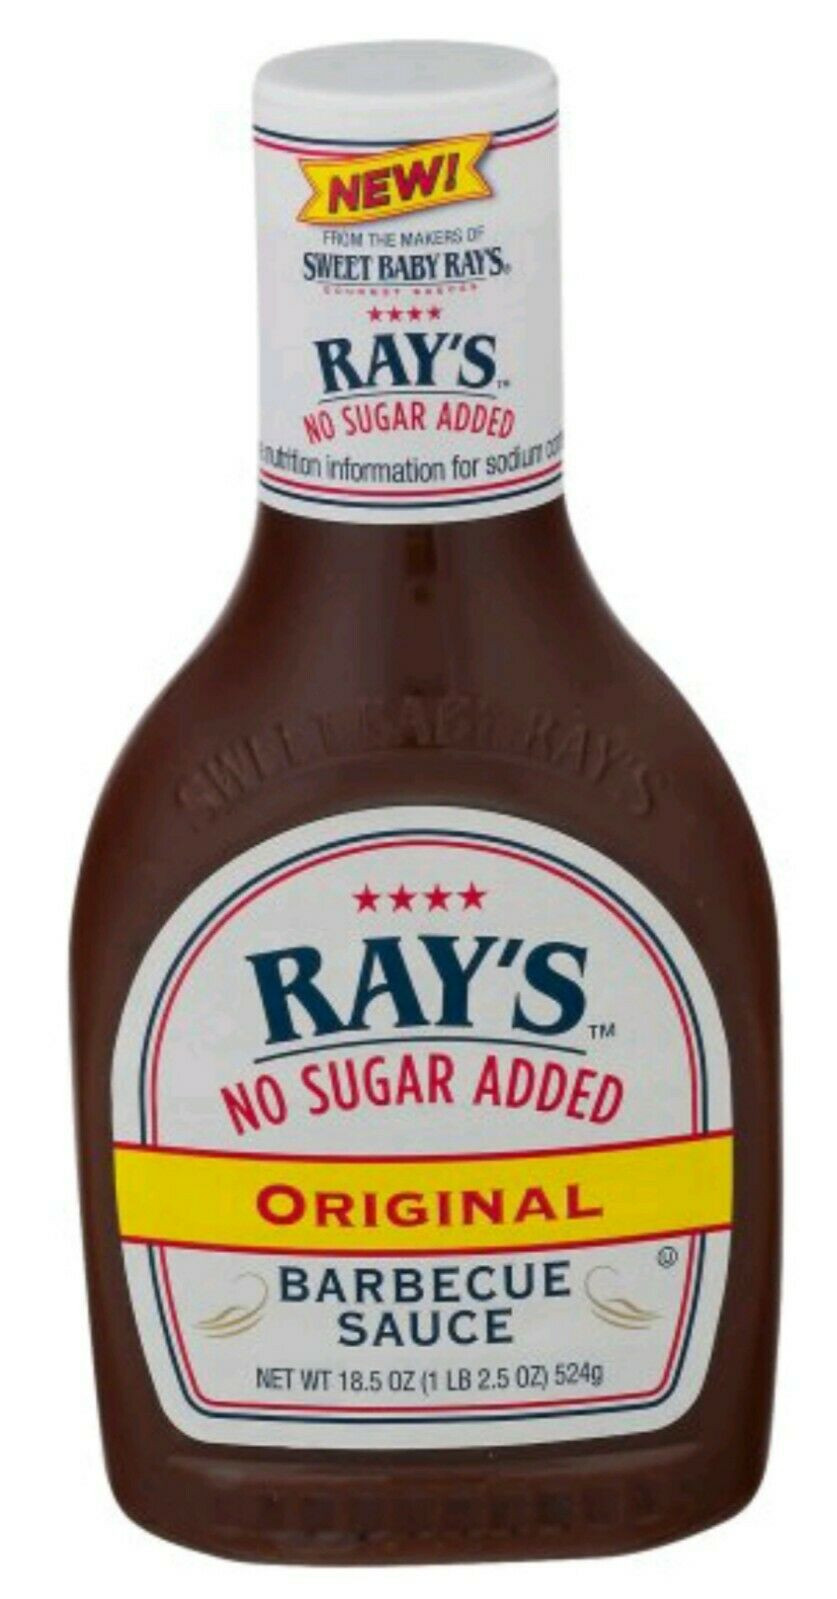 Sweet Baby Ray'S Bbq Sauce Gluten Free
 New Sweet Baby Ray s BBQ No Sugar Added Original Barbecue